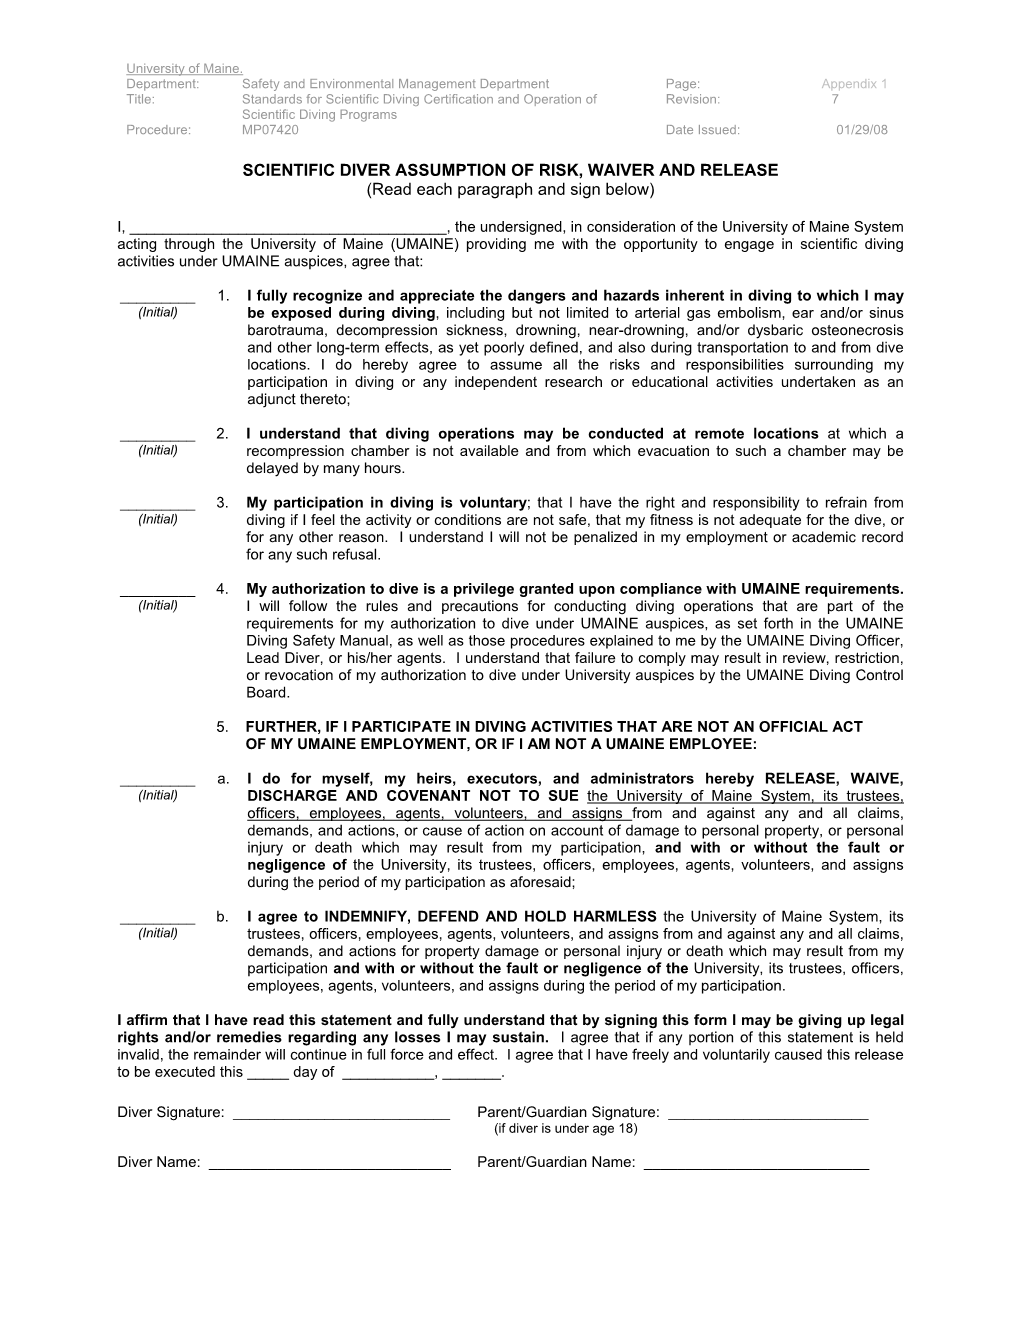 DIVER ASSUMPTION of RISK, WAIVER and RELEASE (Read Each Paragraph and Sign Below)